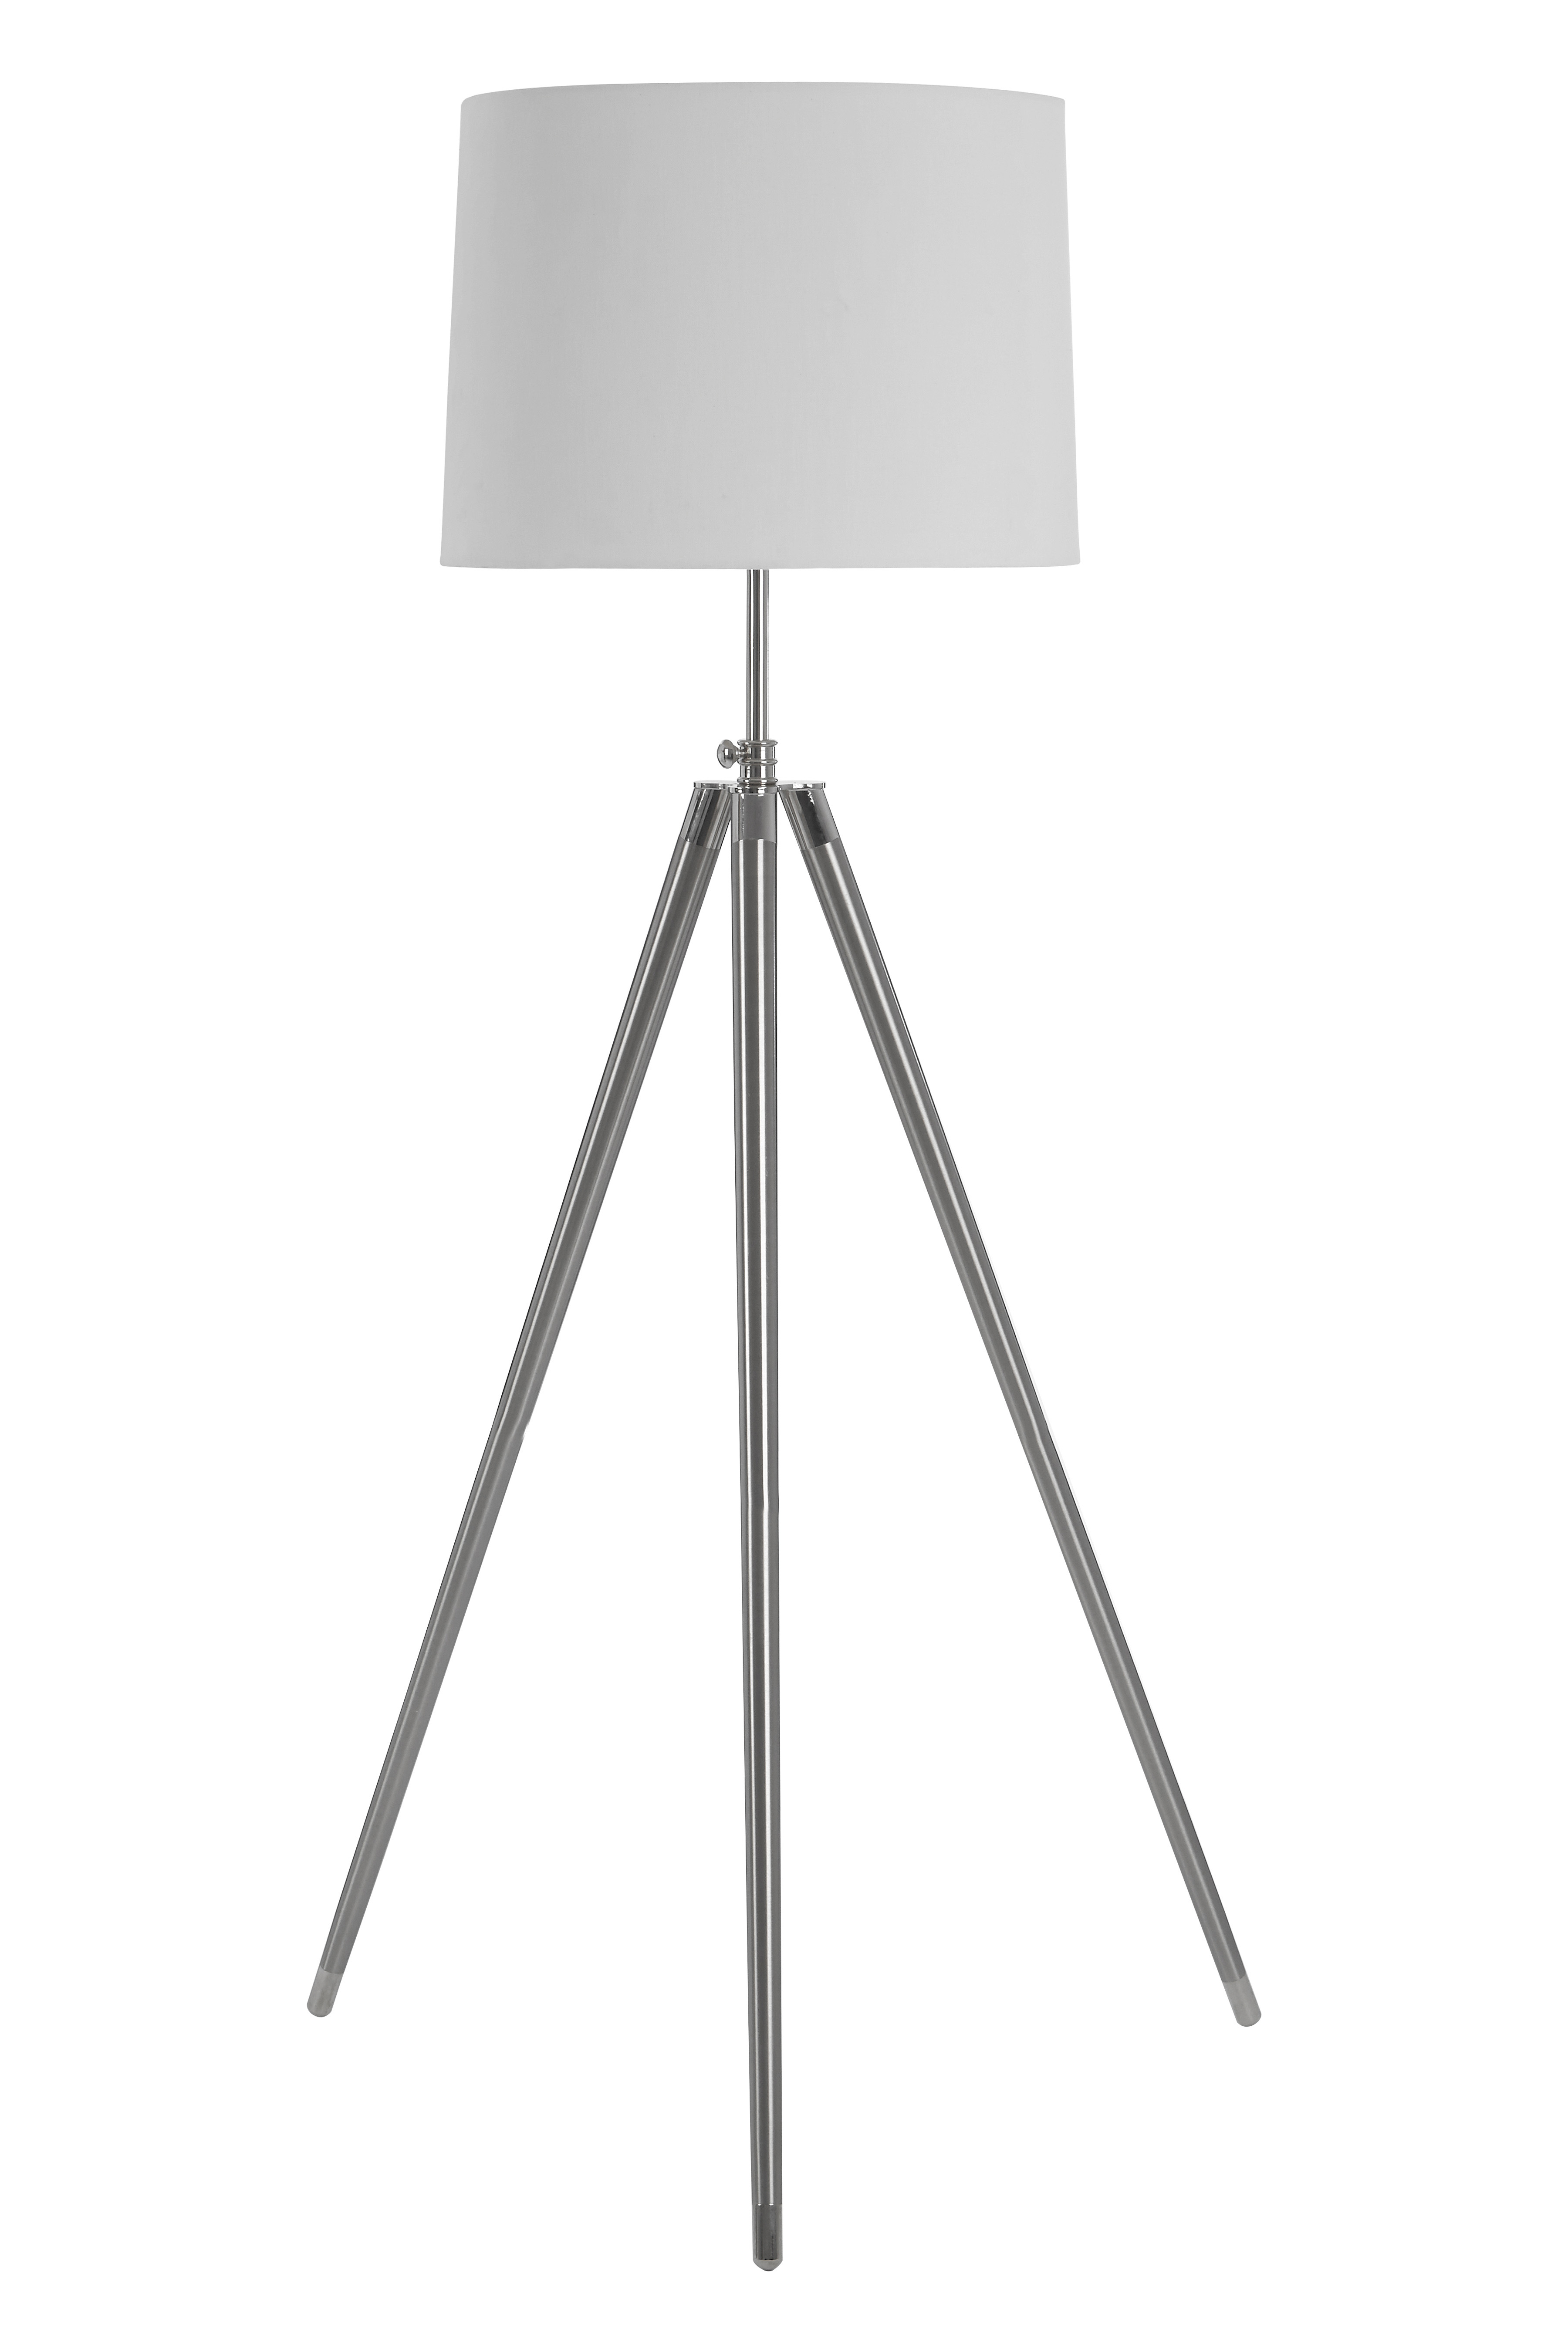 Unique Floor Lamp With Uk Plug pertaining to size 3600 X 5400